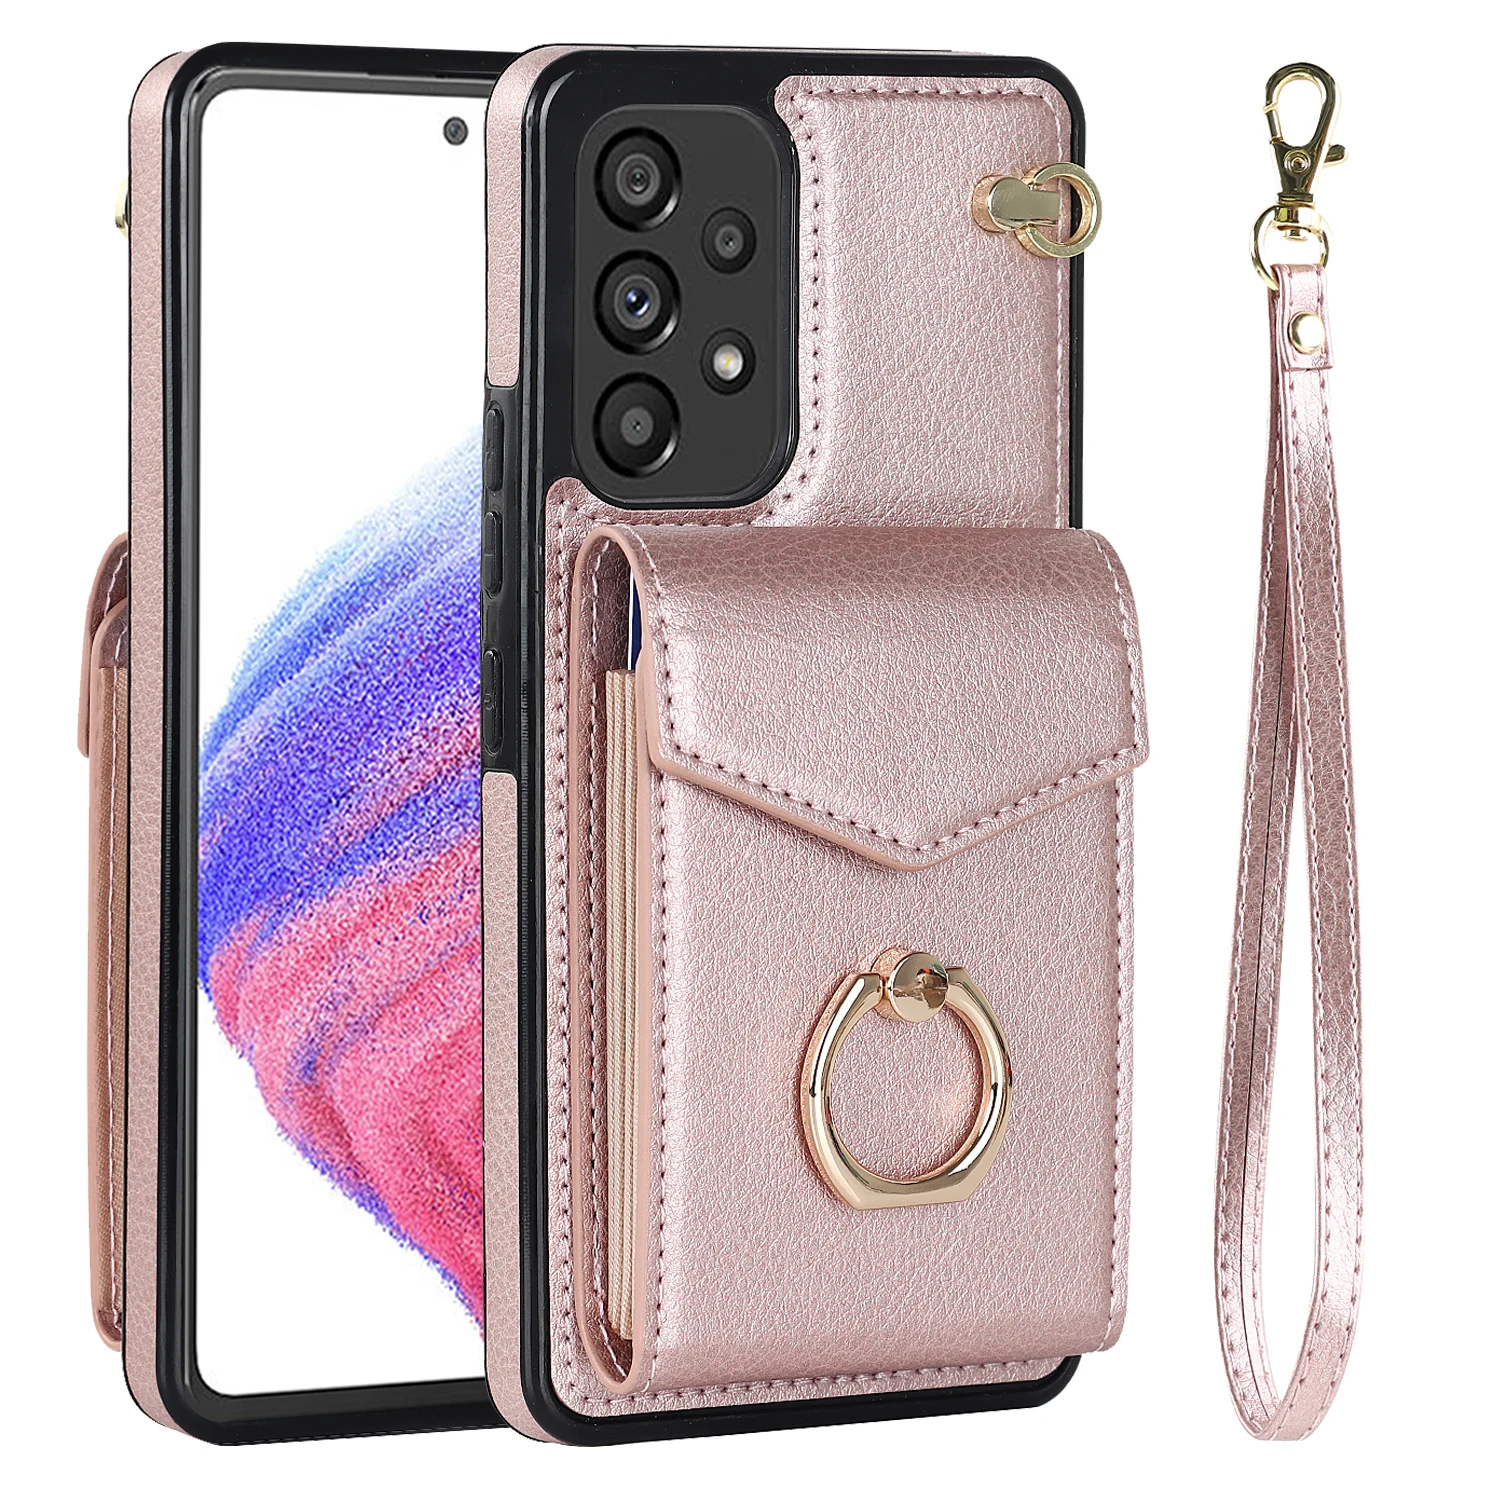 

Luxury Leather Silicone Wallet Case For Samsung Galaxy A73 A53 A33 A13 A82 A72 A52 A42 A32 A22 A12 A71 A51 A70 A50 Lanyard Cover